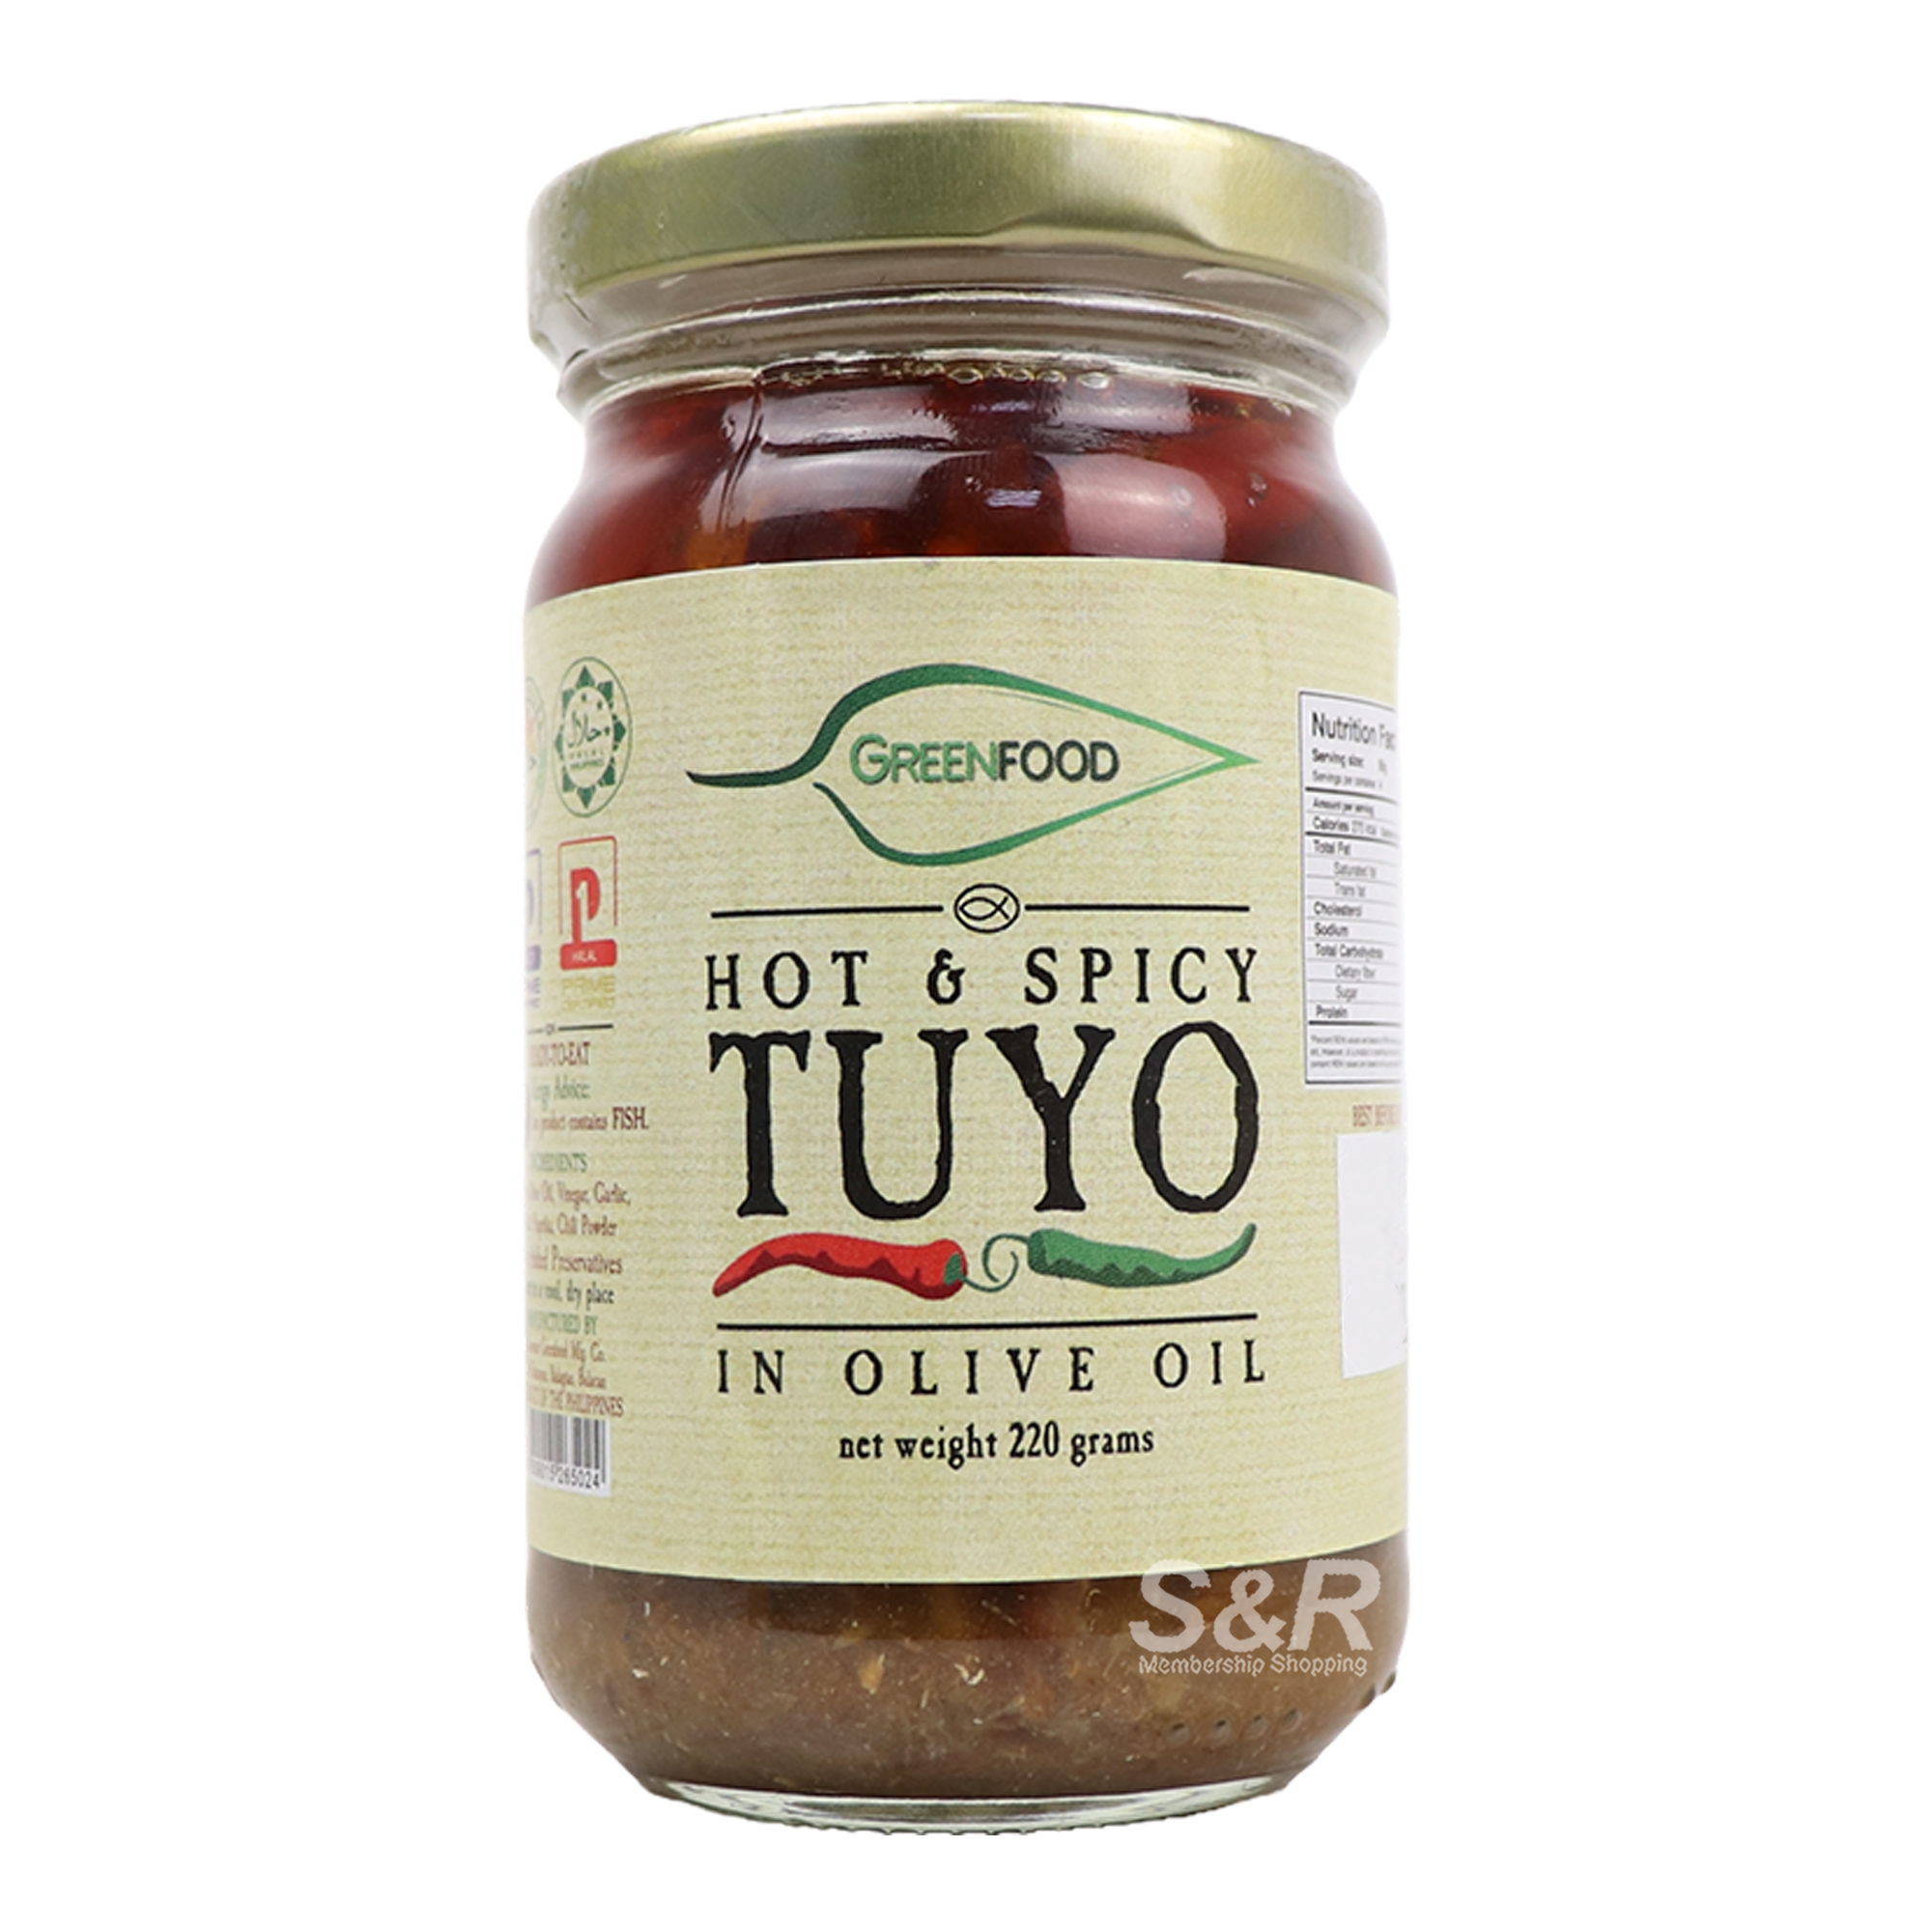 Green Food Hot & Spicy Tuyo in Olive Oil 200g